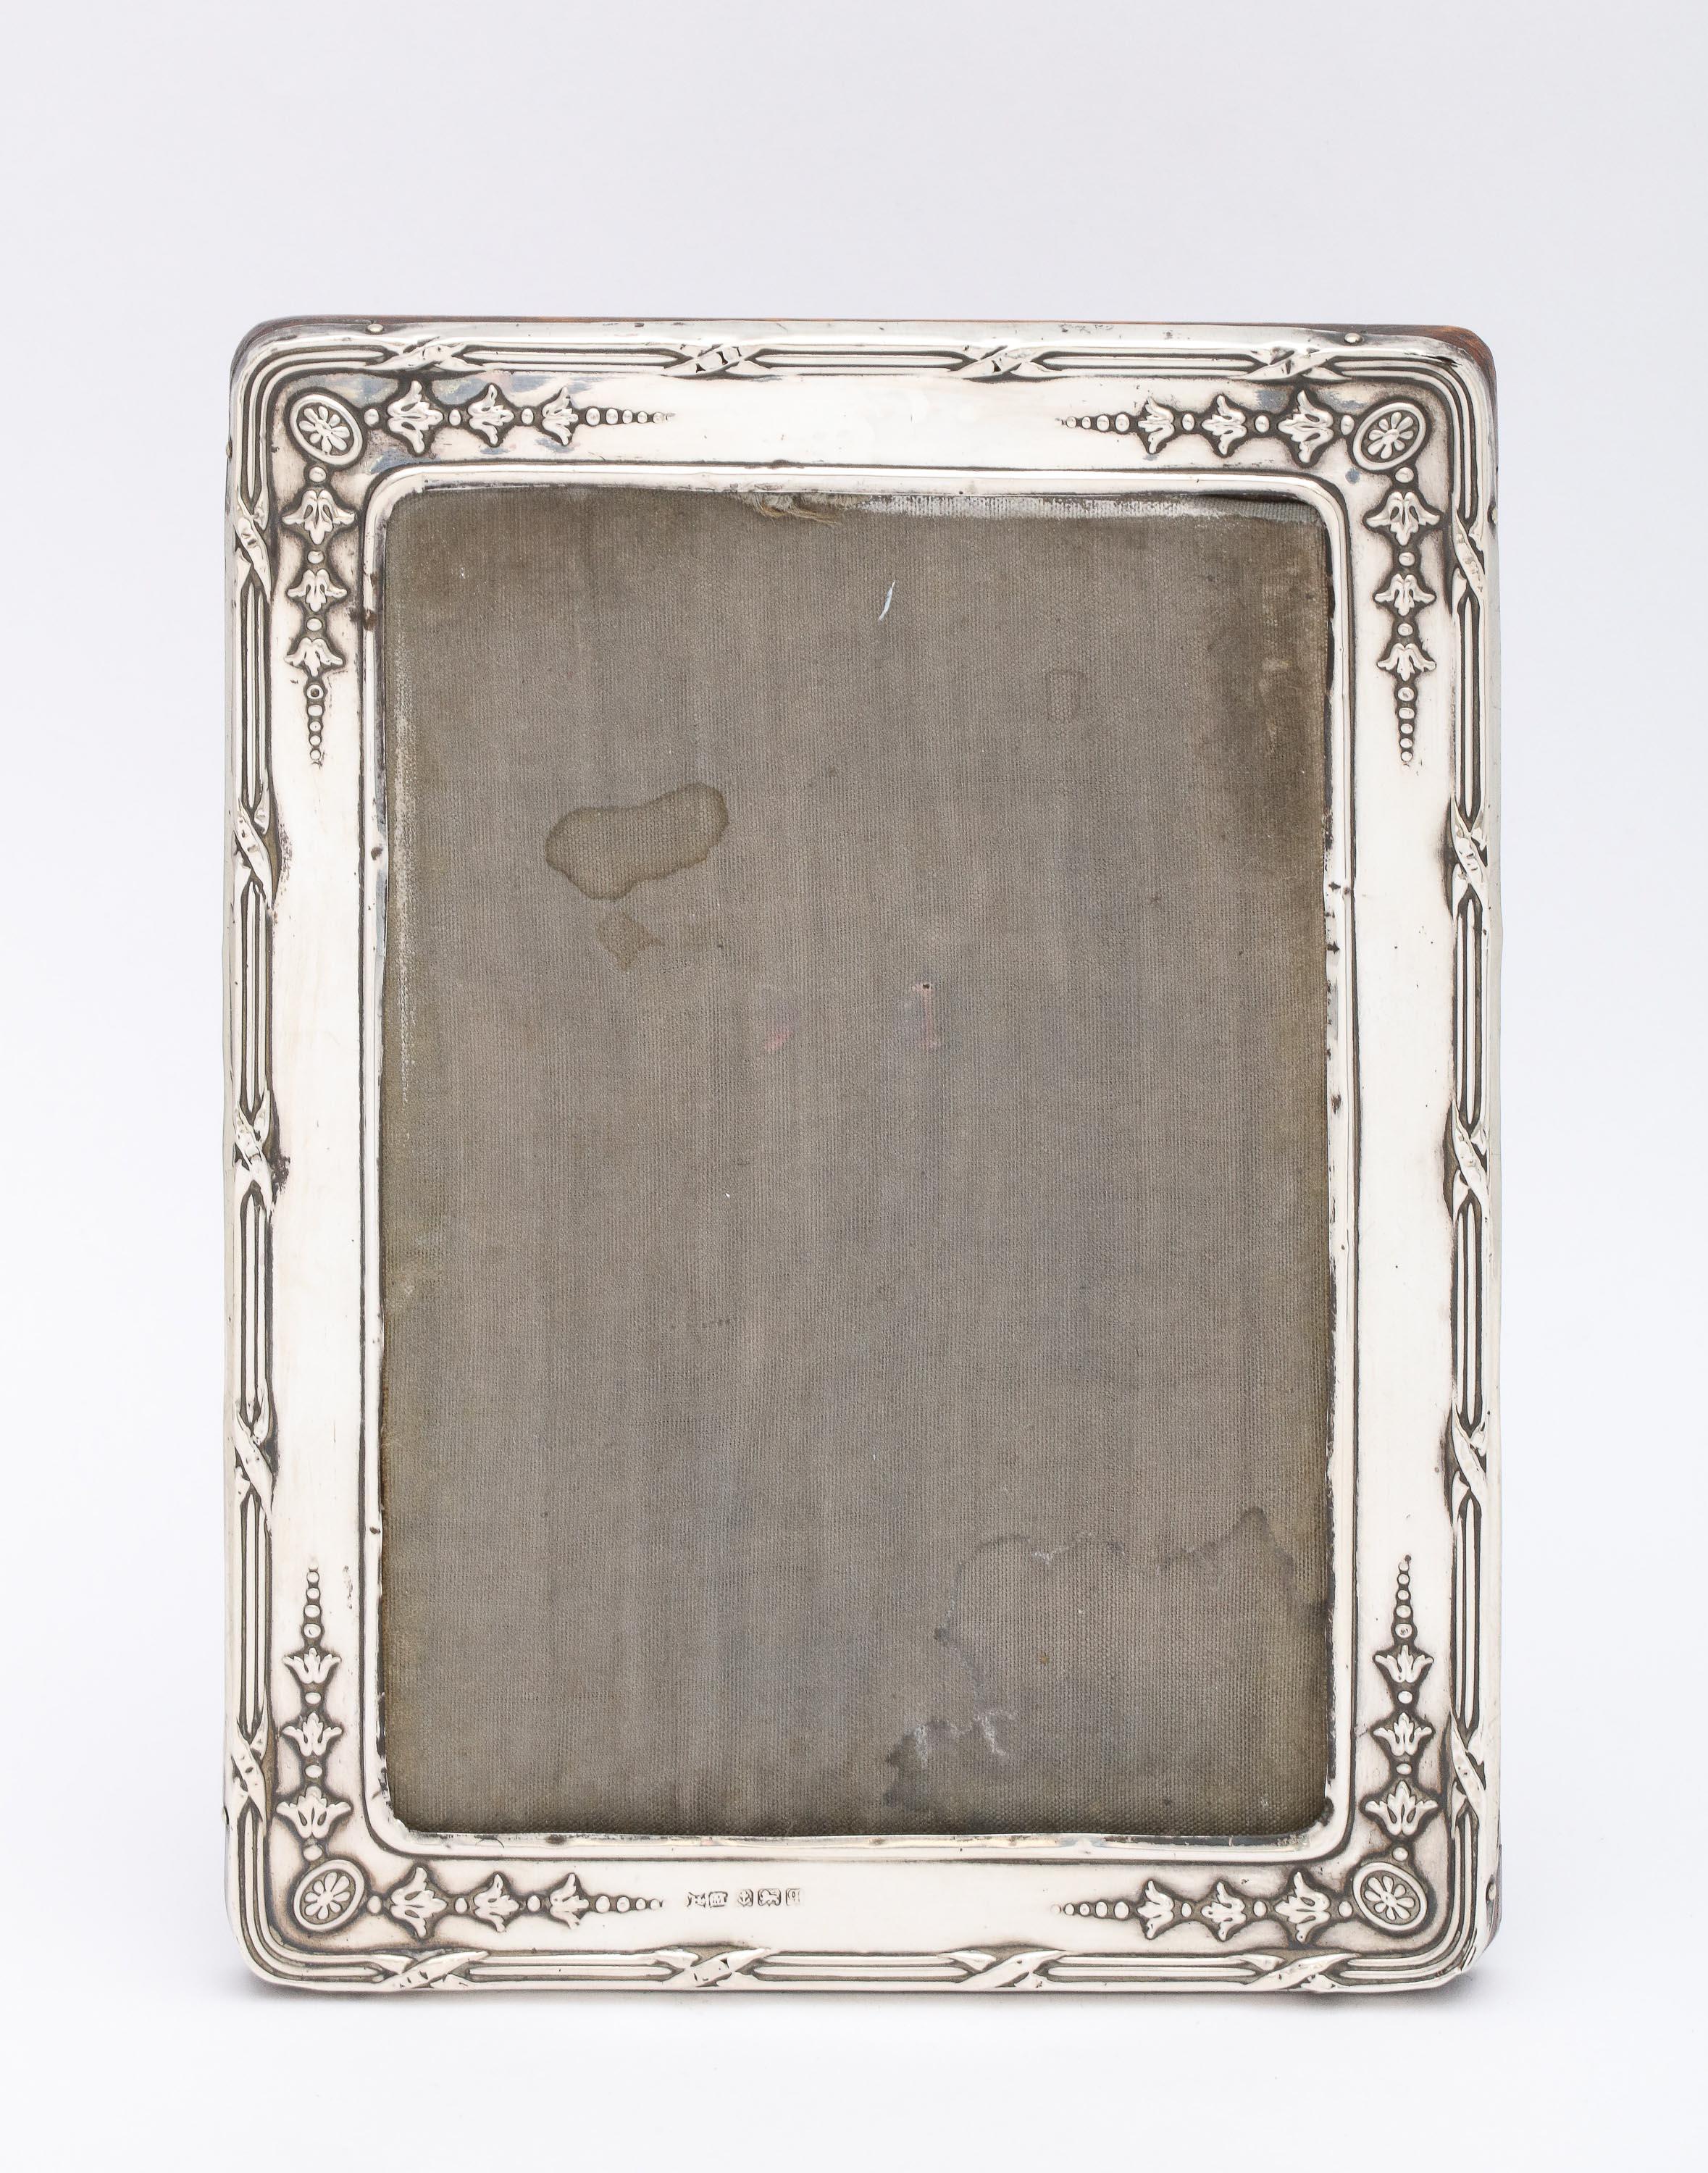 Edwardian, sterling silver picture frame with wood back, Birmingham, England, year-hallmarked for 1915, H. Matthews - maker. Measures 6 3/4 inches high x 5 inches wide x 4 1/2 inches deep (when easel is in open position). Will hold a photo that is 5